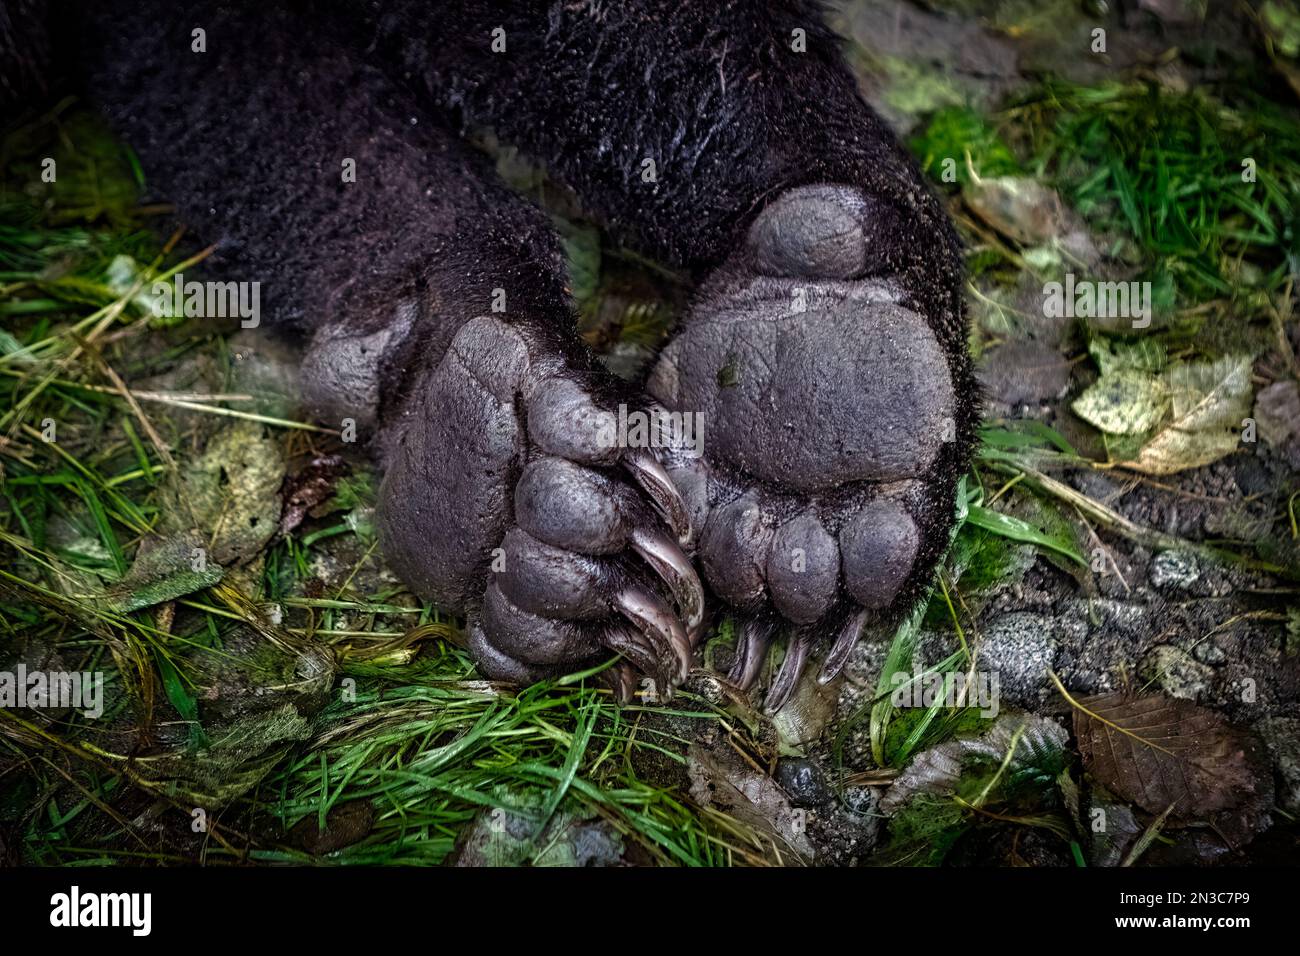 A detail showing a brown bear’s paws and claws (Ursus arctos) while he is tranquilized to be radio-collared by state biologists Stock Photo